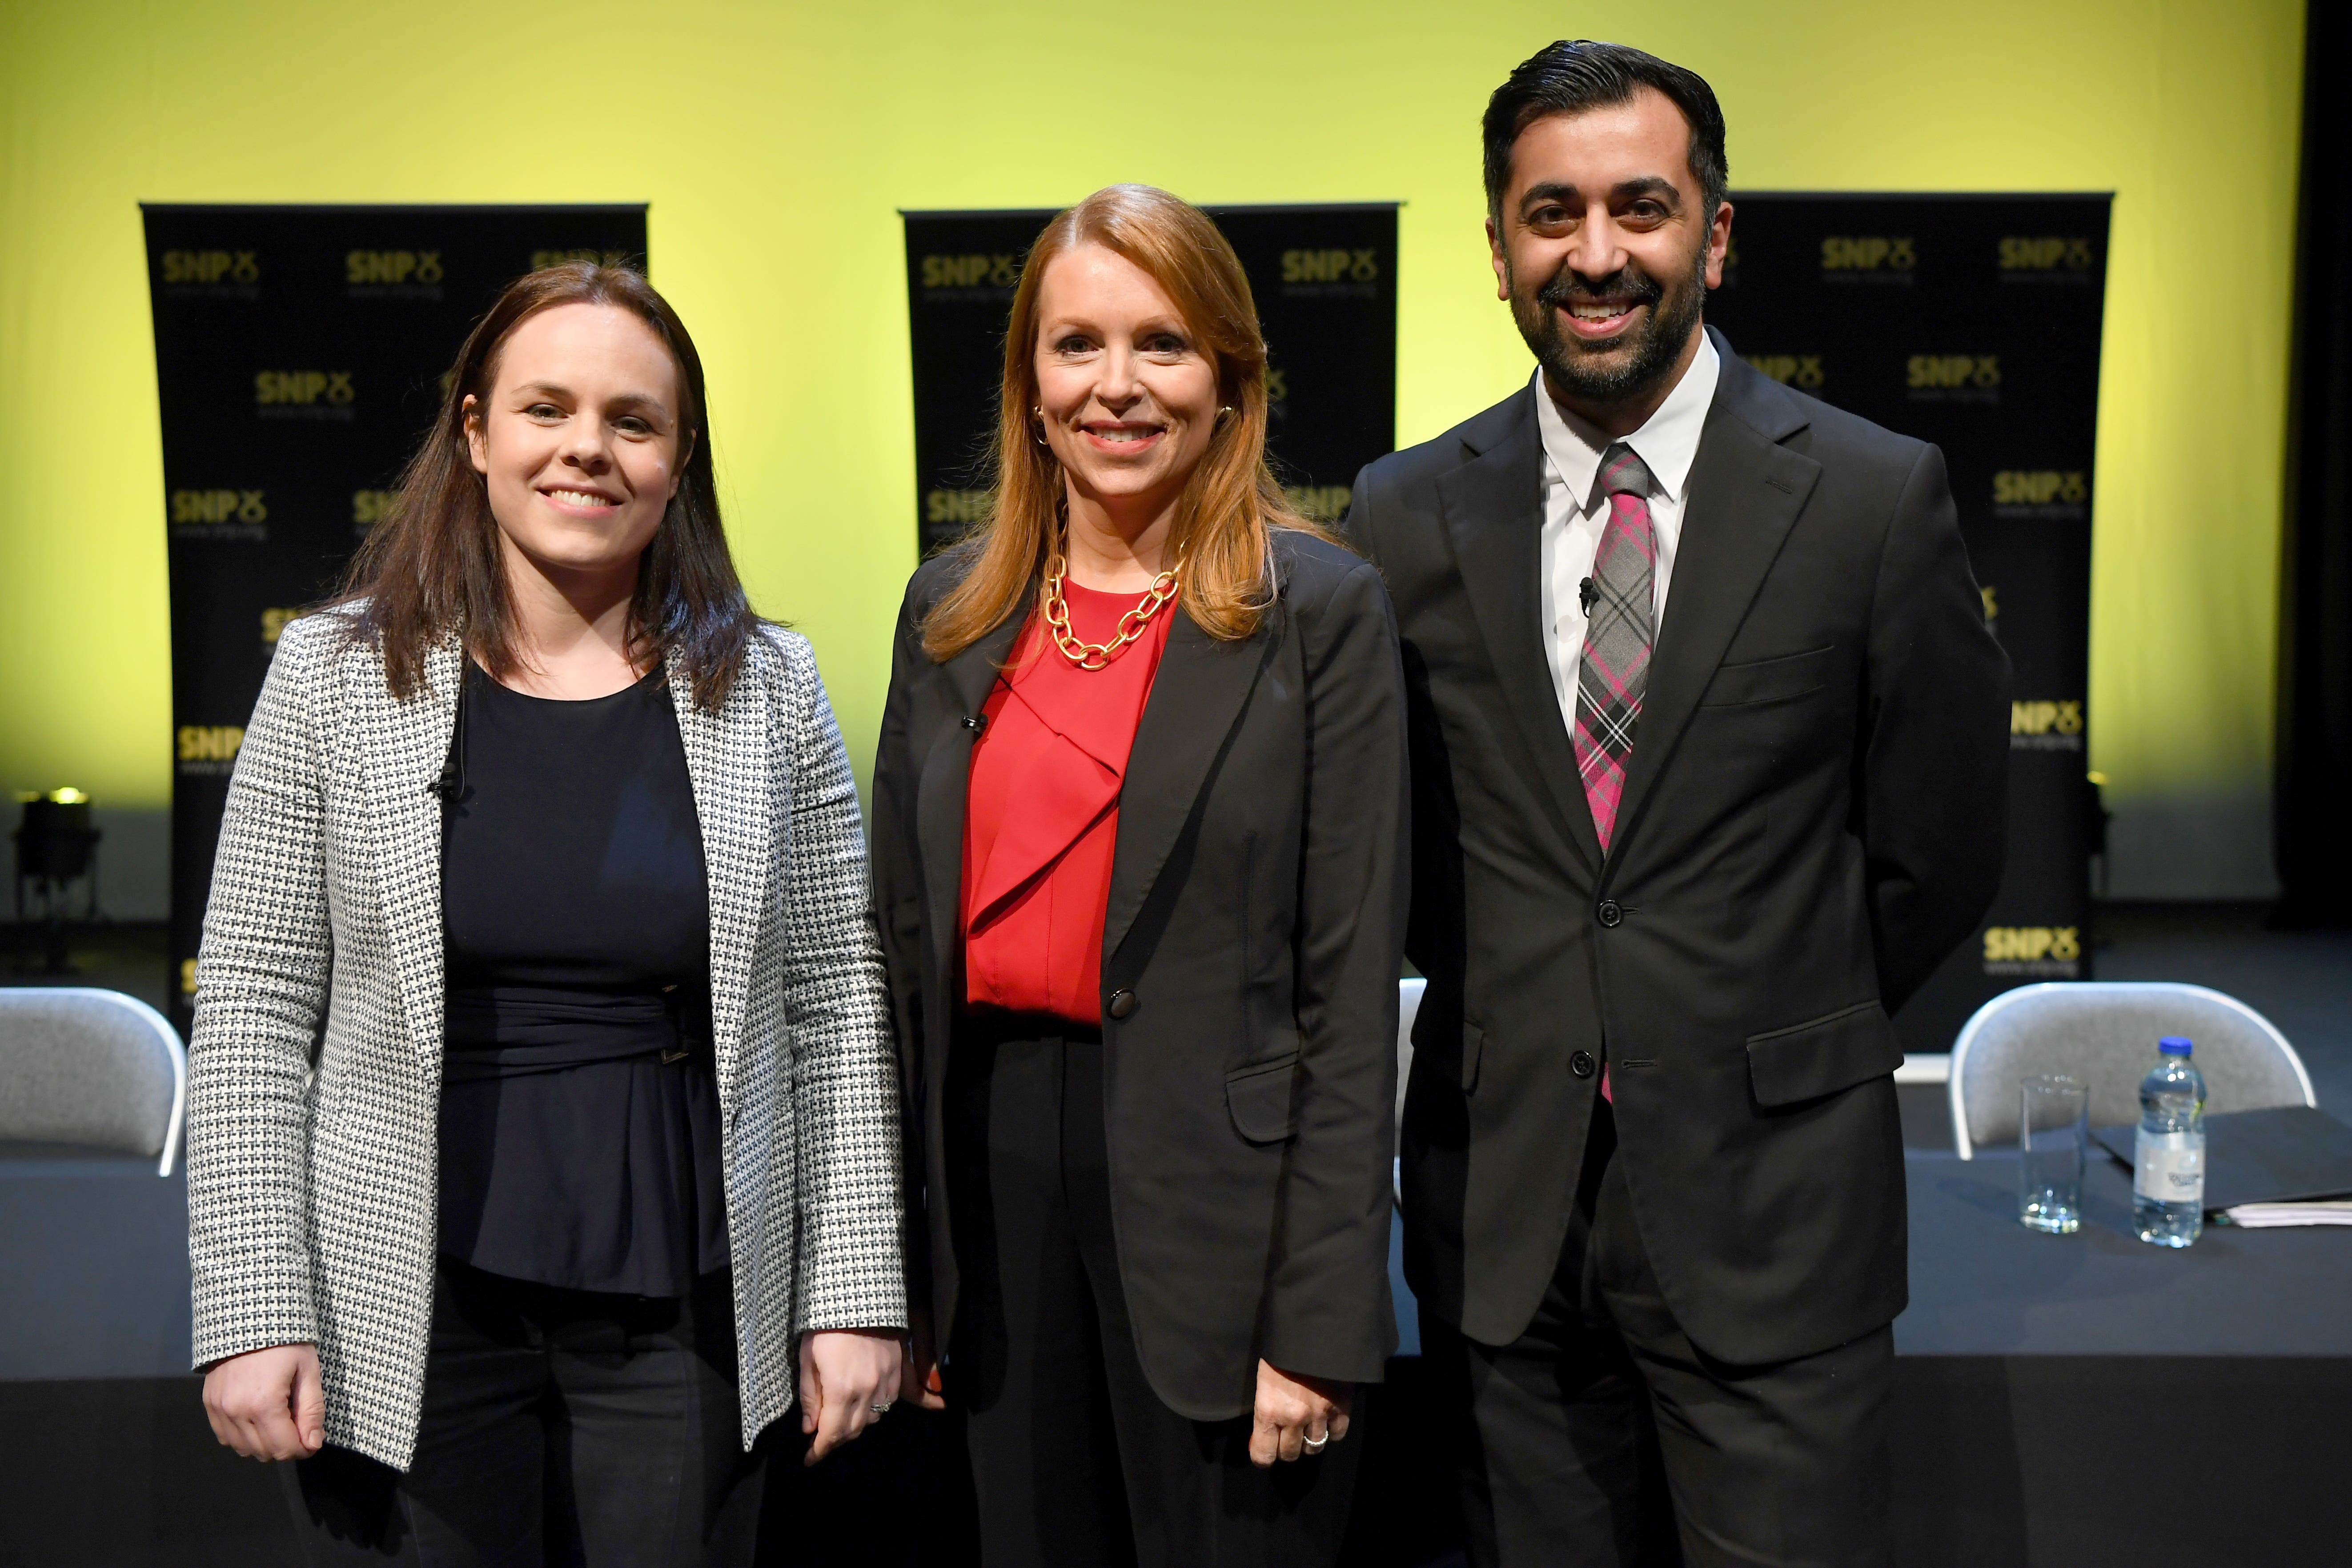 The SNP’s leadership candidates faced off in the first hustings of the campaign on Wednesday (Andy Buchanan/PA)